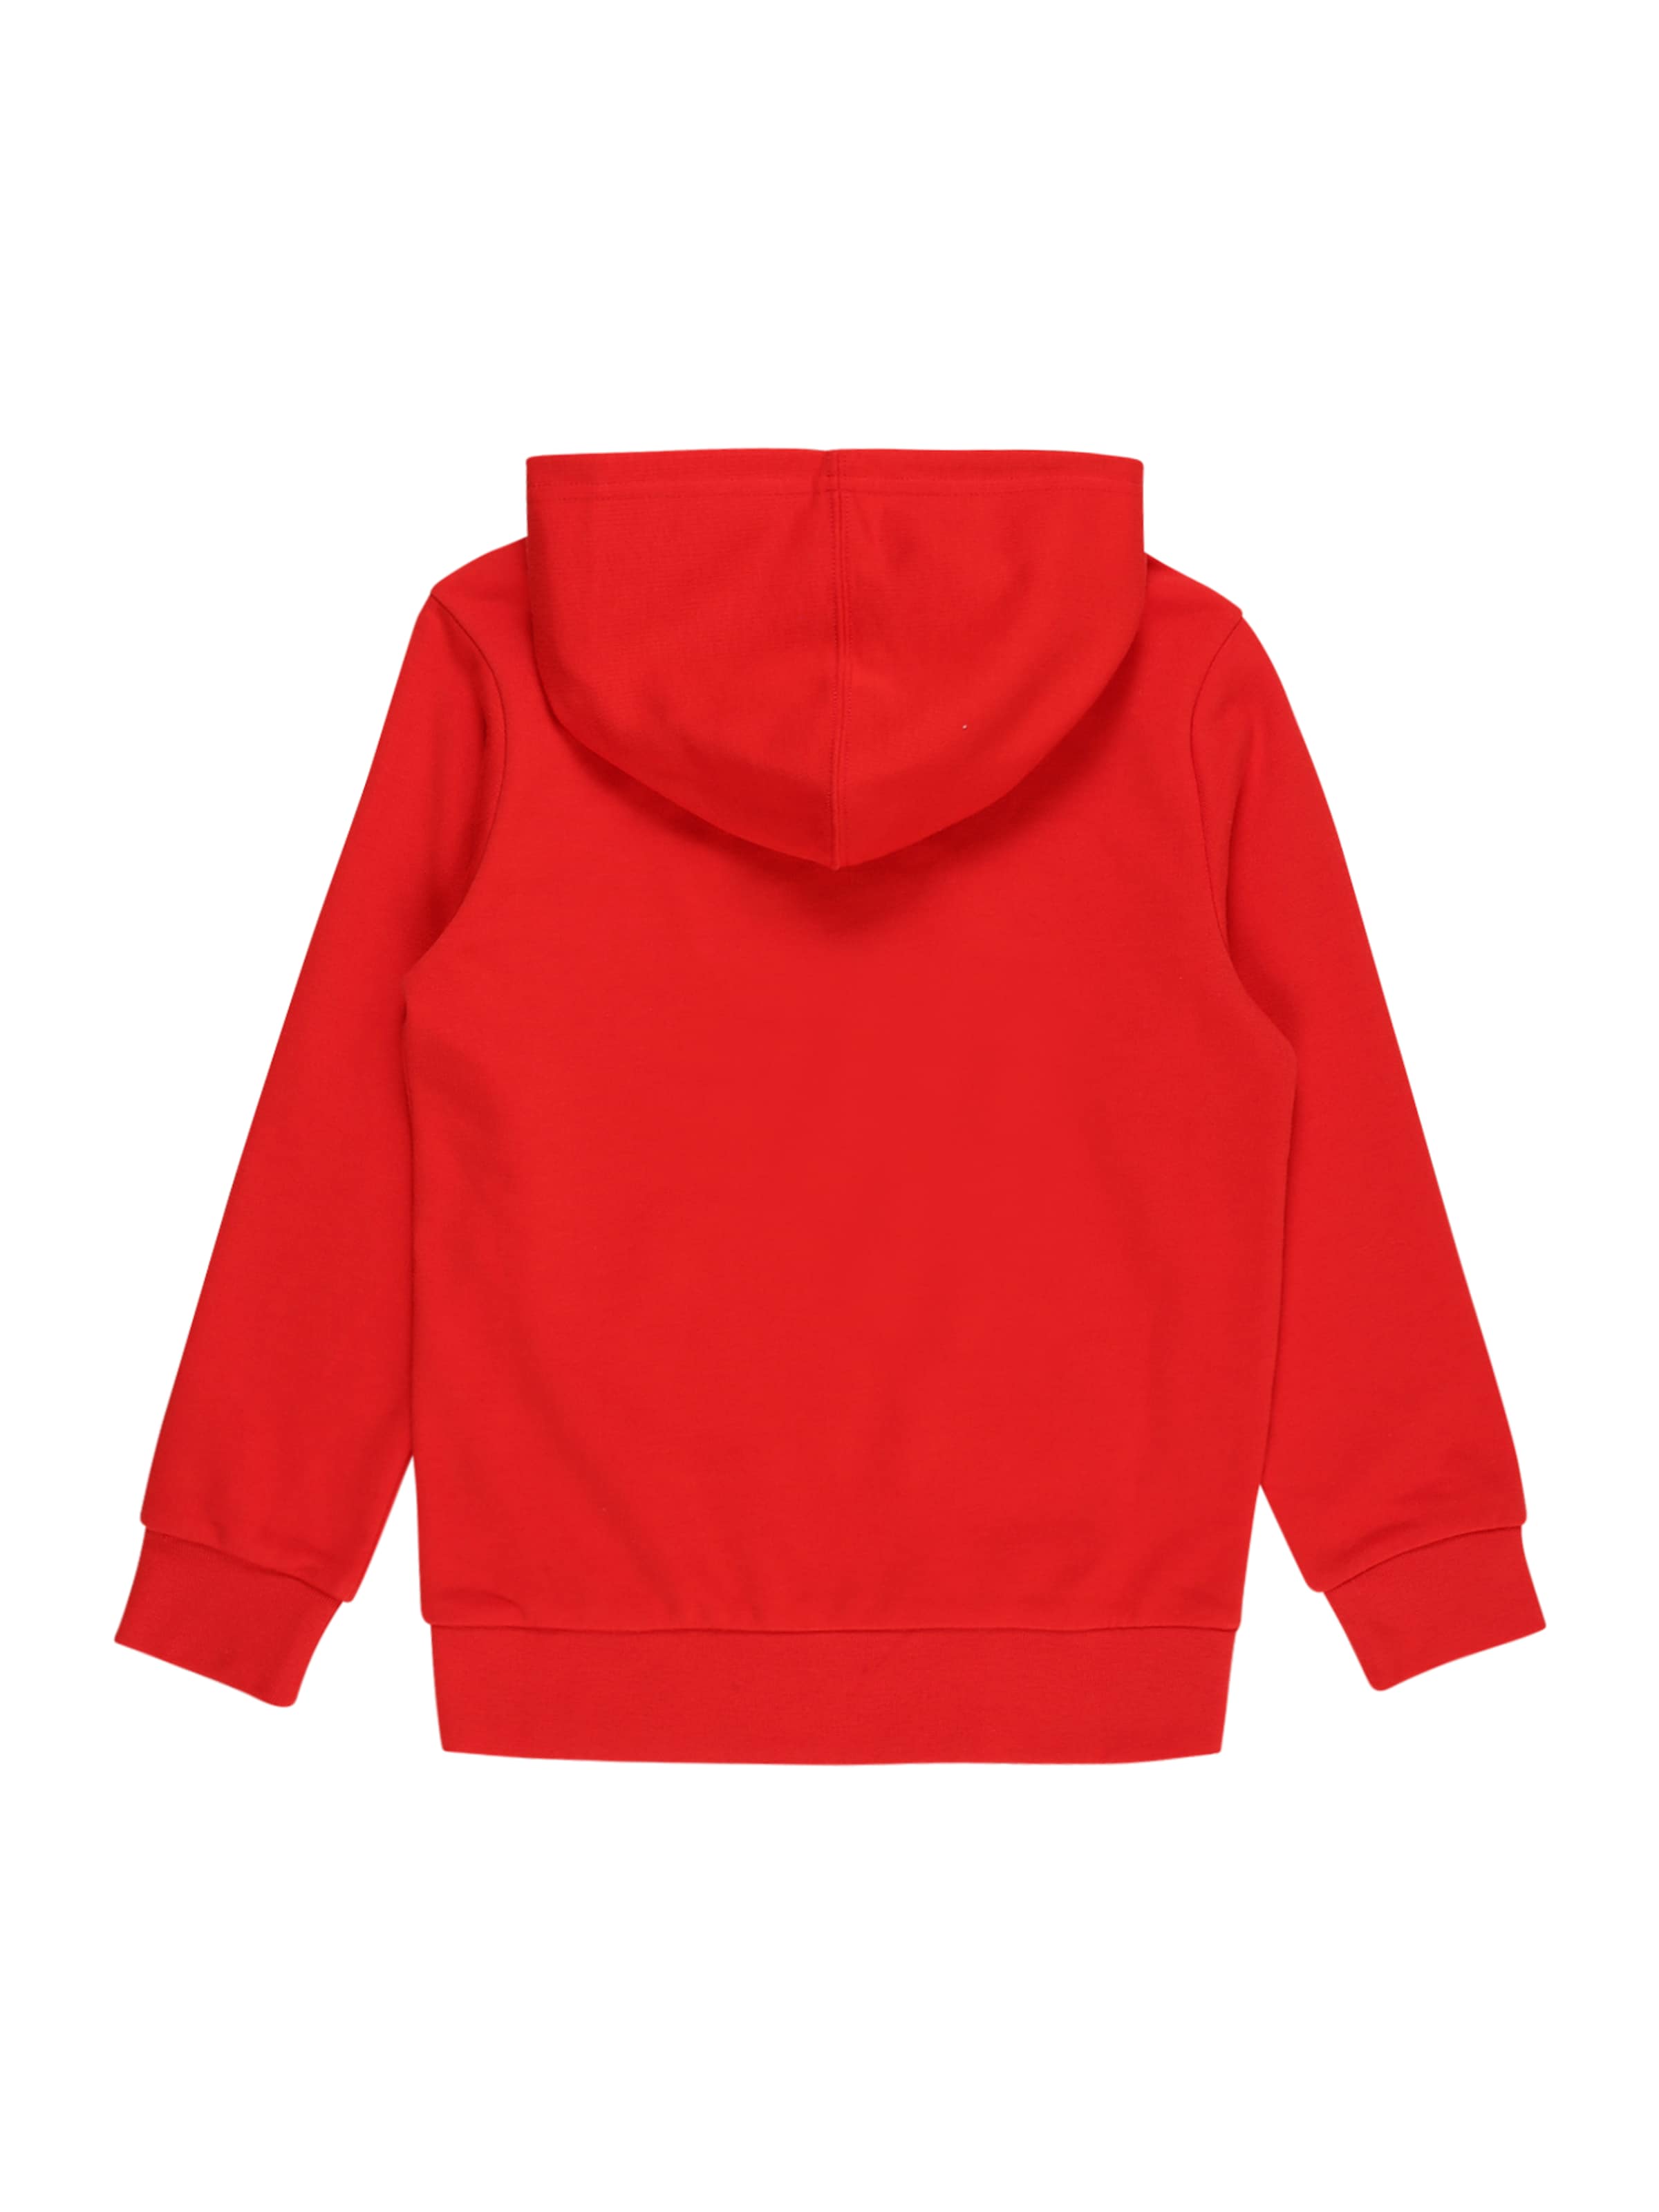 Kinder Teens (Gr. 140-176) Champion Authentic Athletic Apparel Sweatshirt in Rot - SY15577